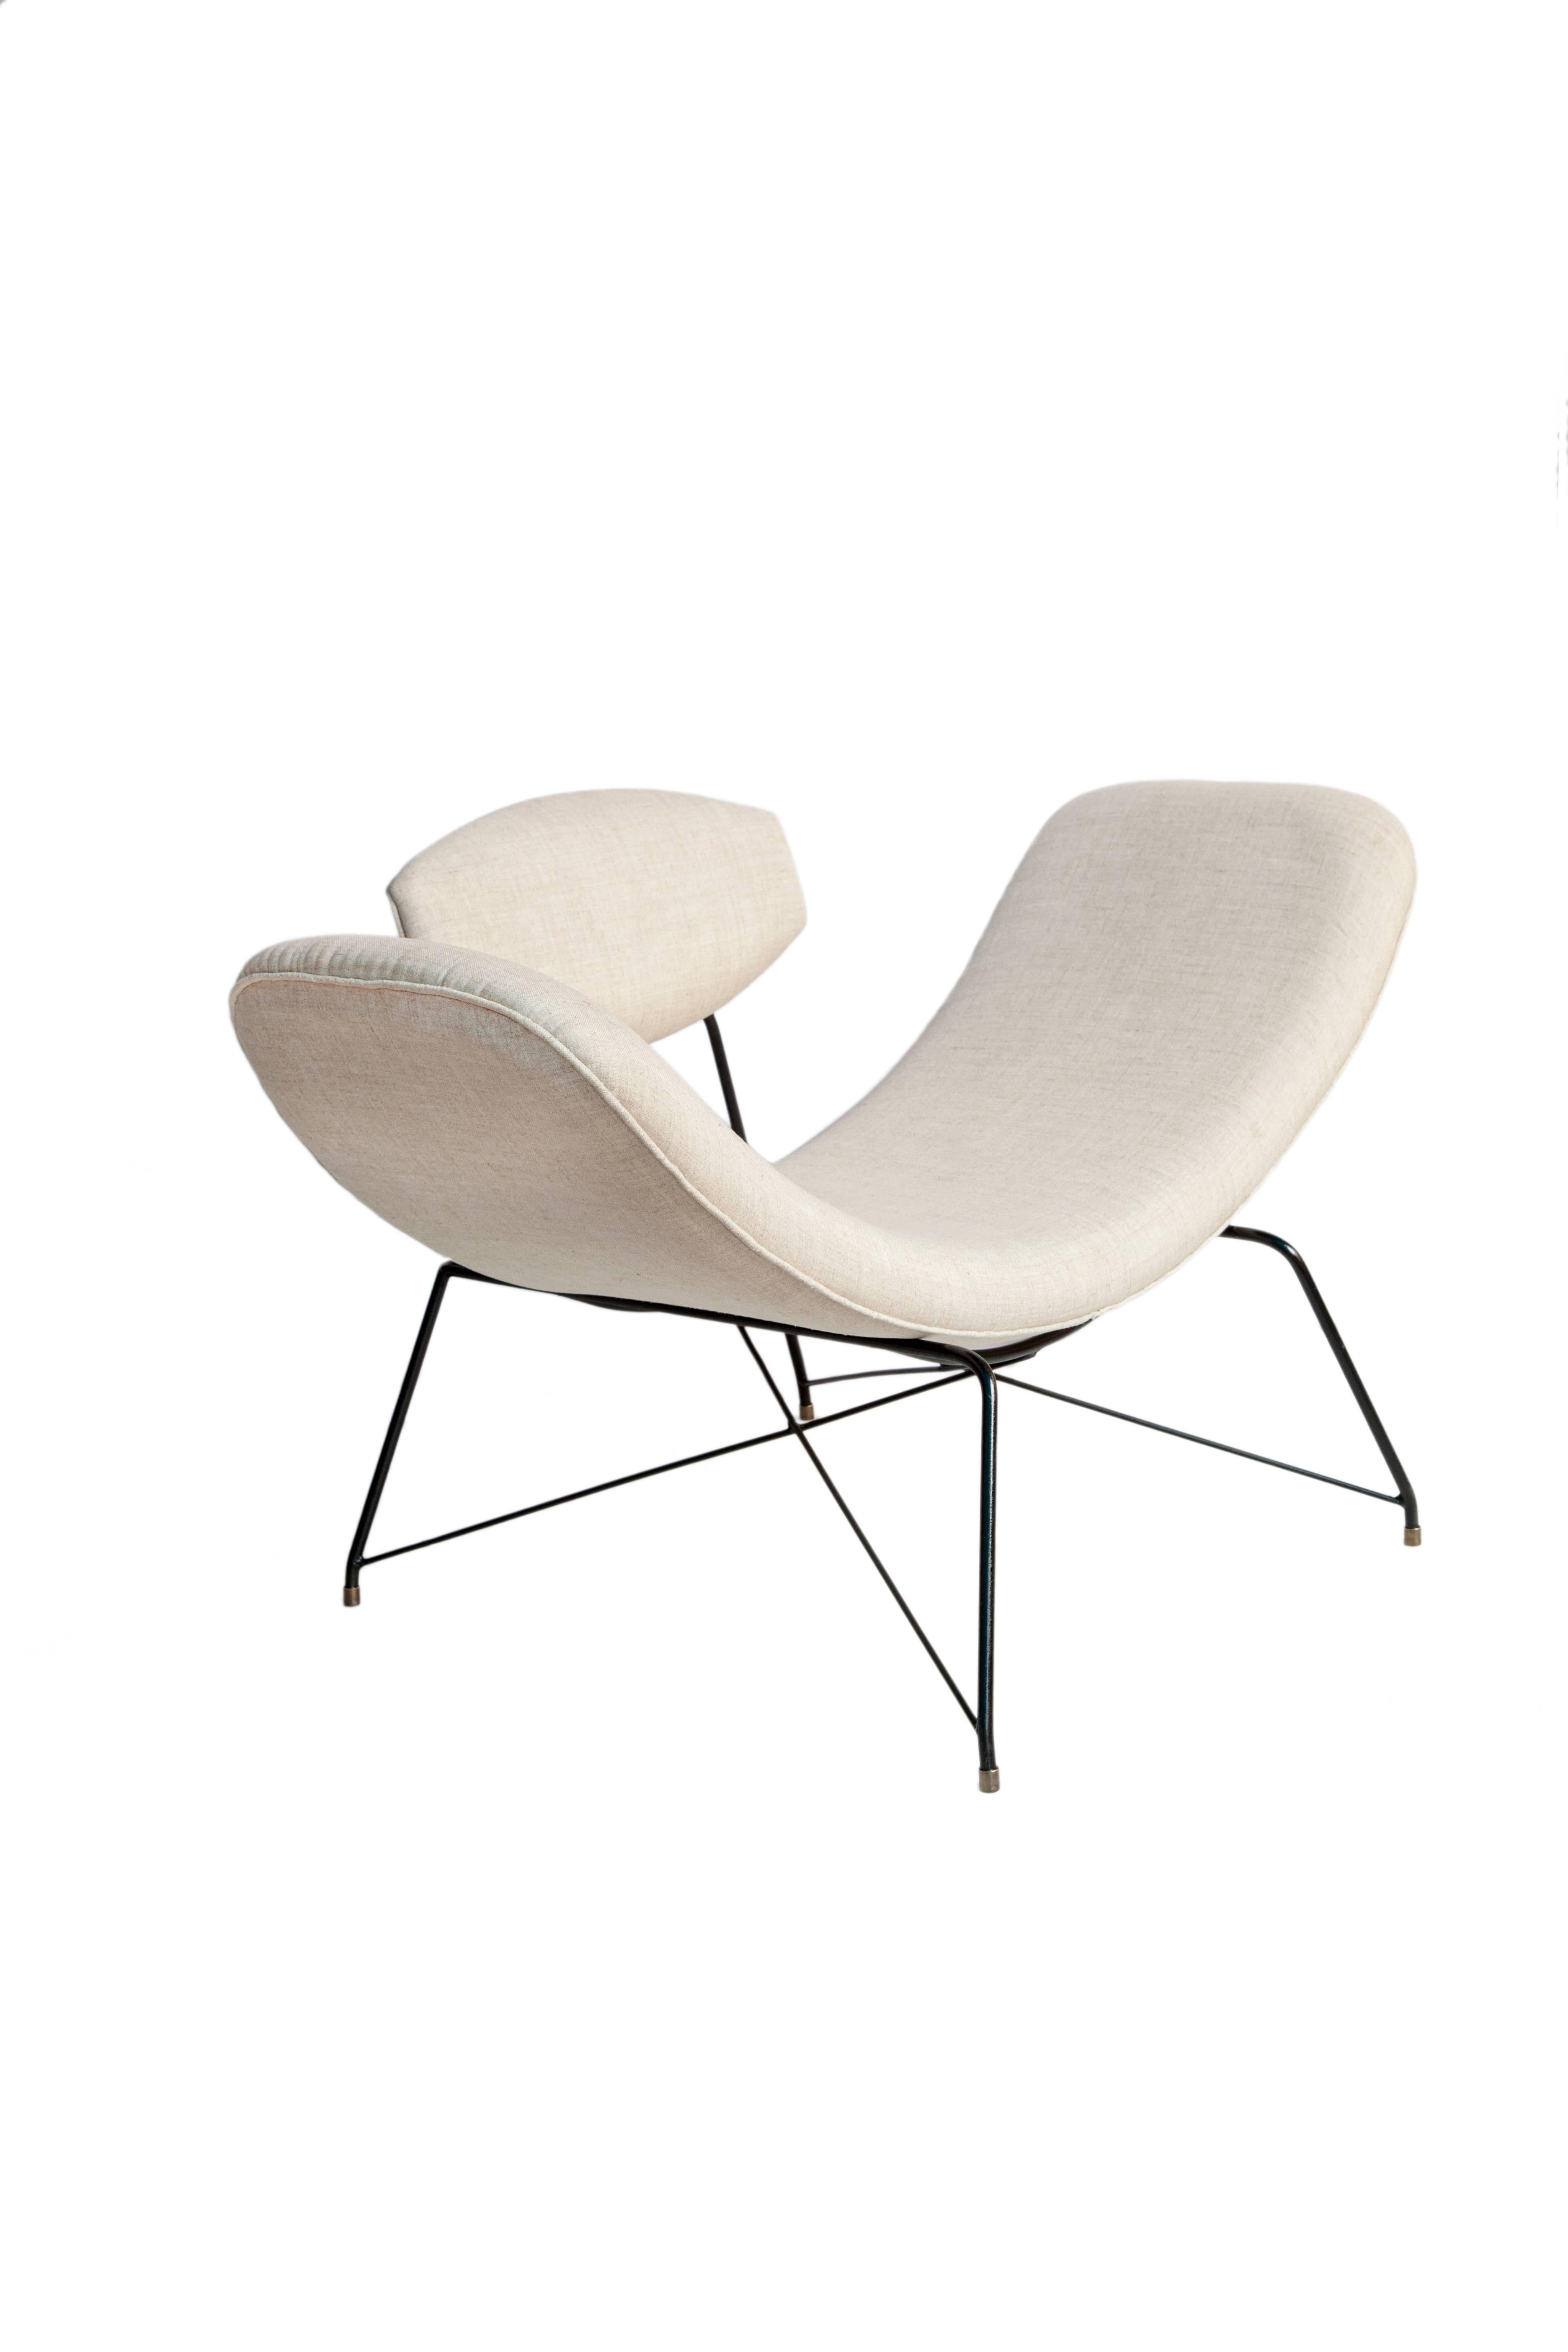 Reversible Brazilian Mid-Century Modern armchair designed by Martin Eisler & Carlo Hauner from the 1950s. This piece has iron frame and recently reupholstered white linen seat and back. The seat slides horizontally to become similar to a chaise